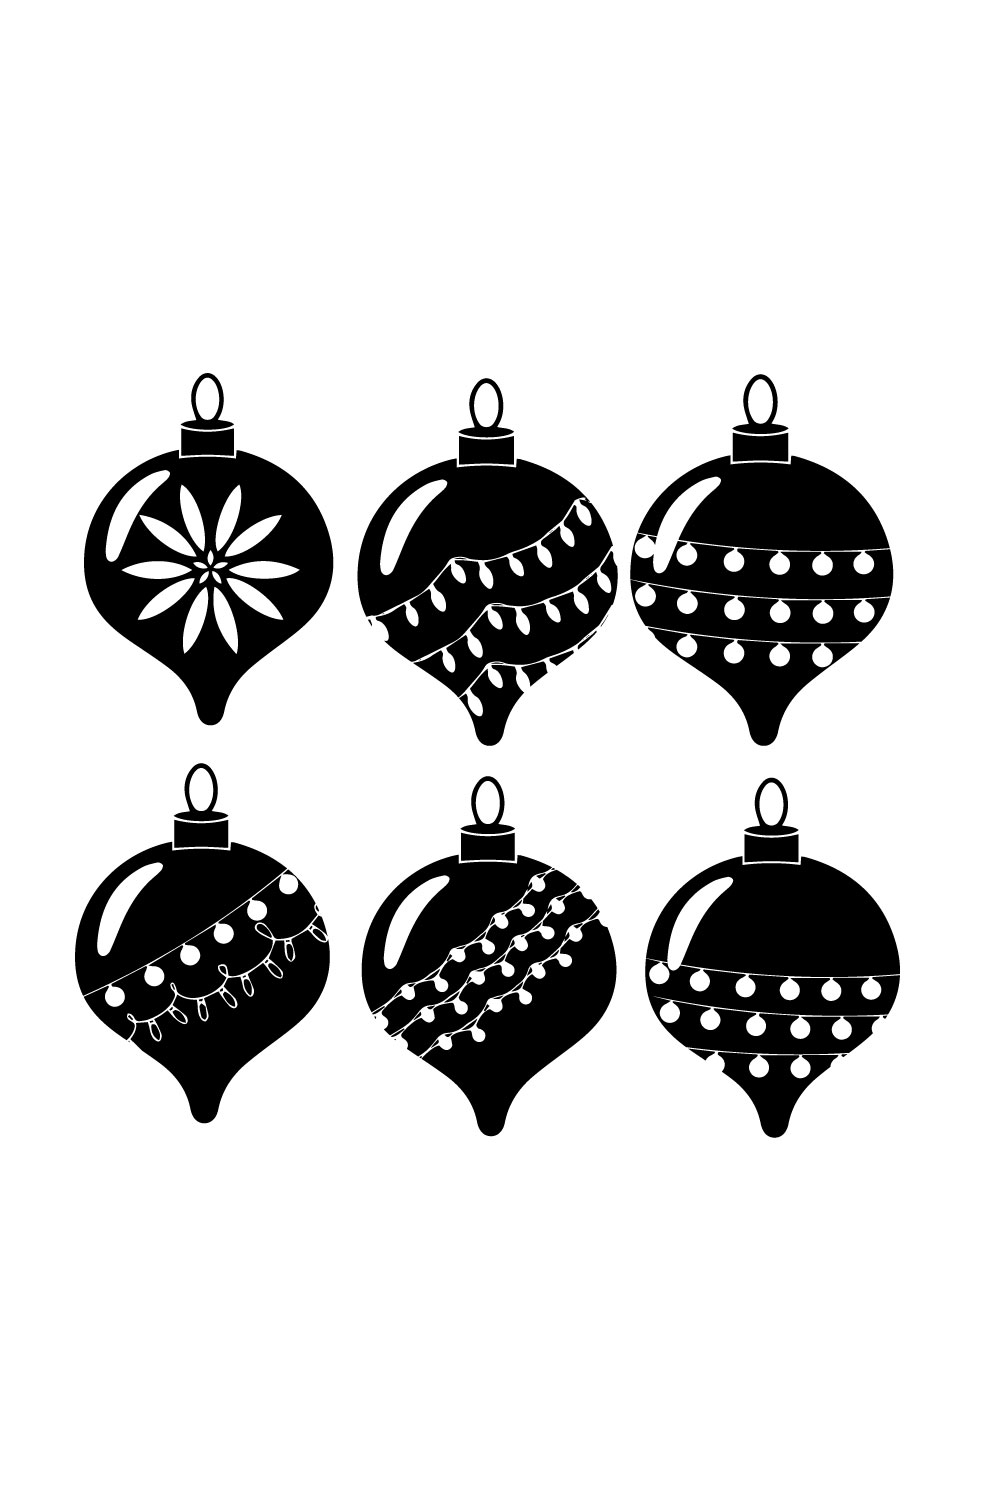 A selection of beautiful black images of Christmas tree ornaments